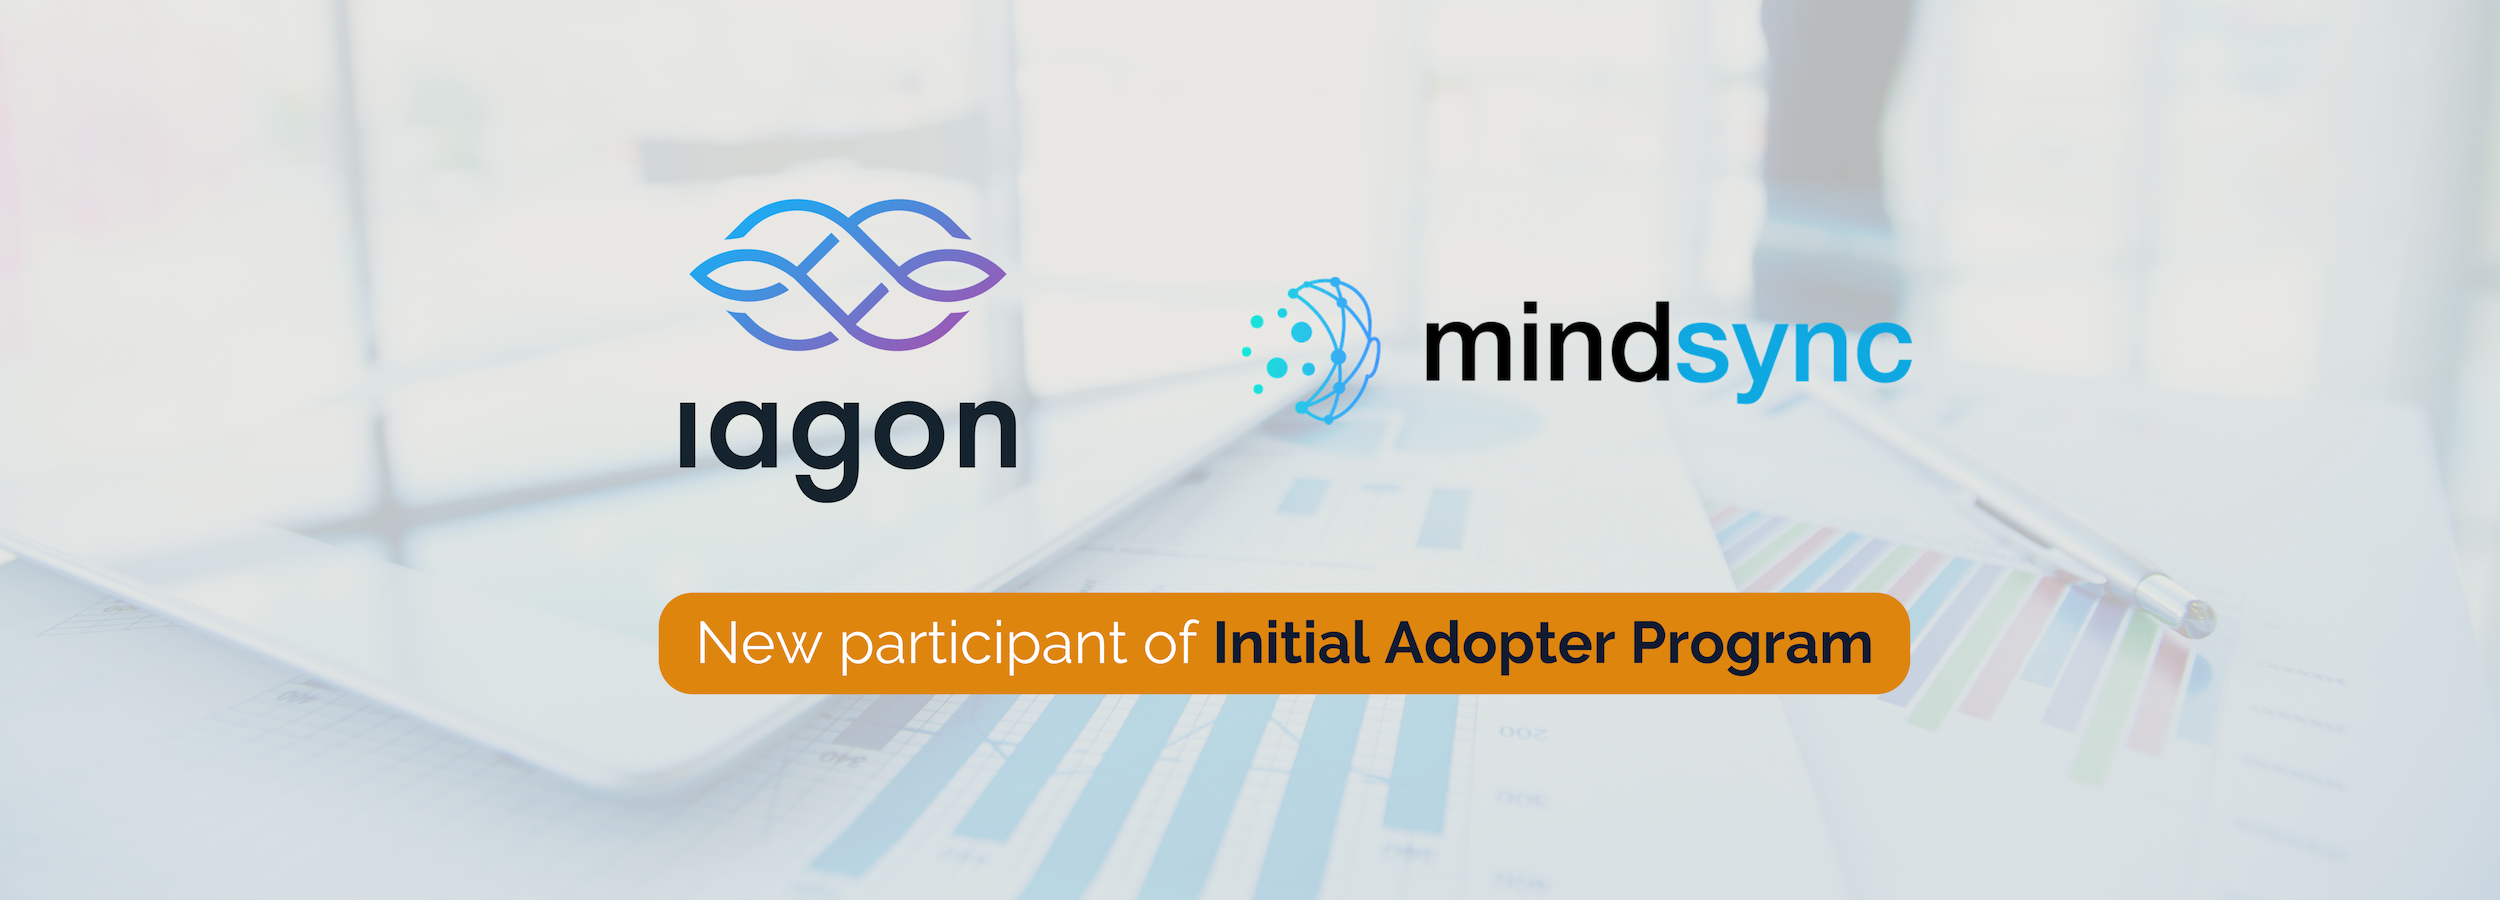 MindSync Joins the IAGON Initial Adopter Program